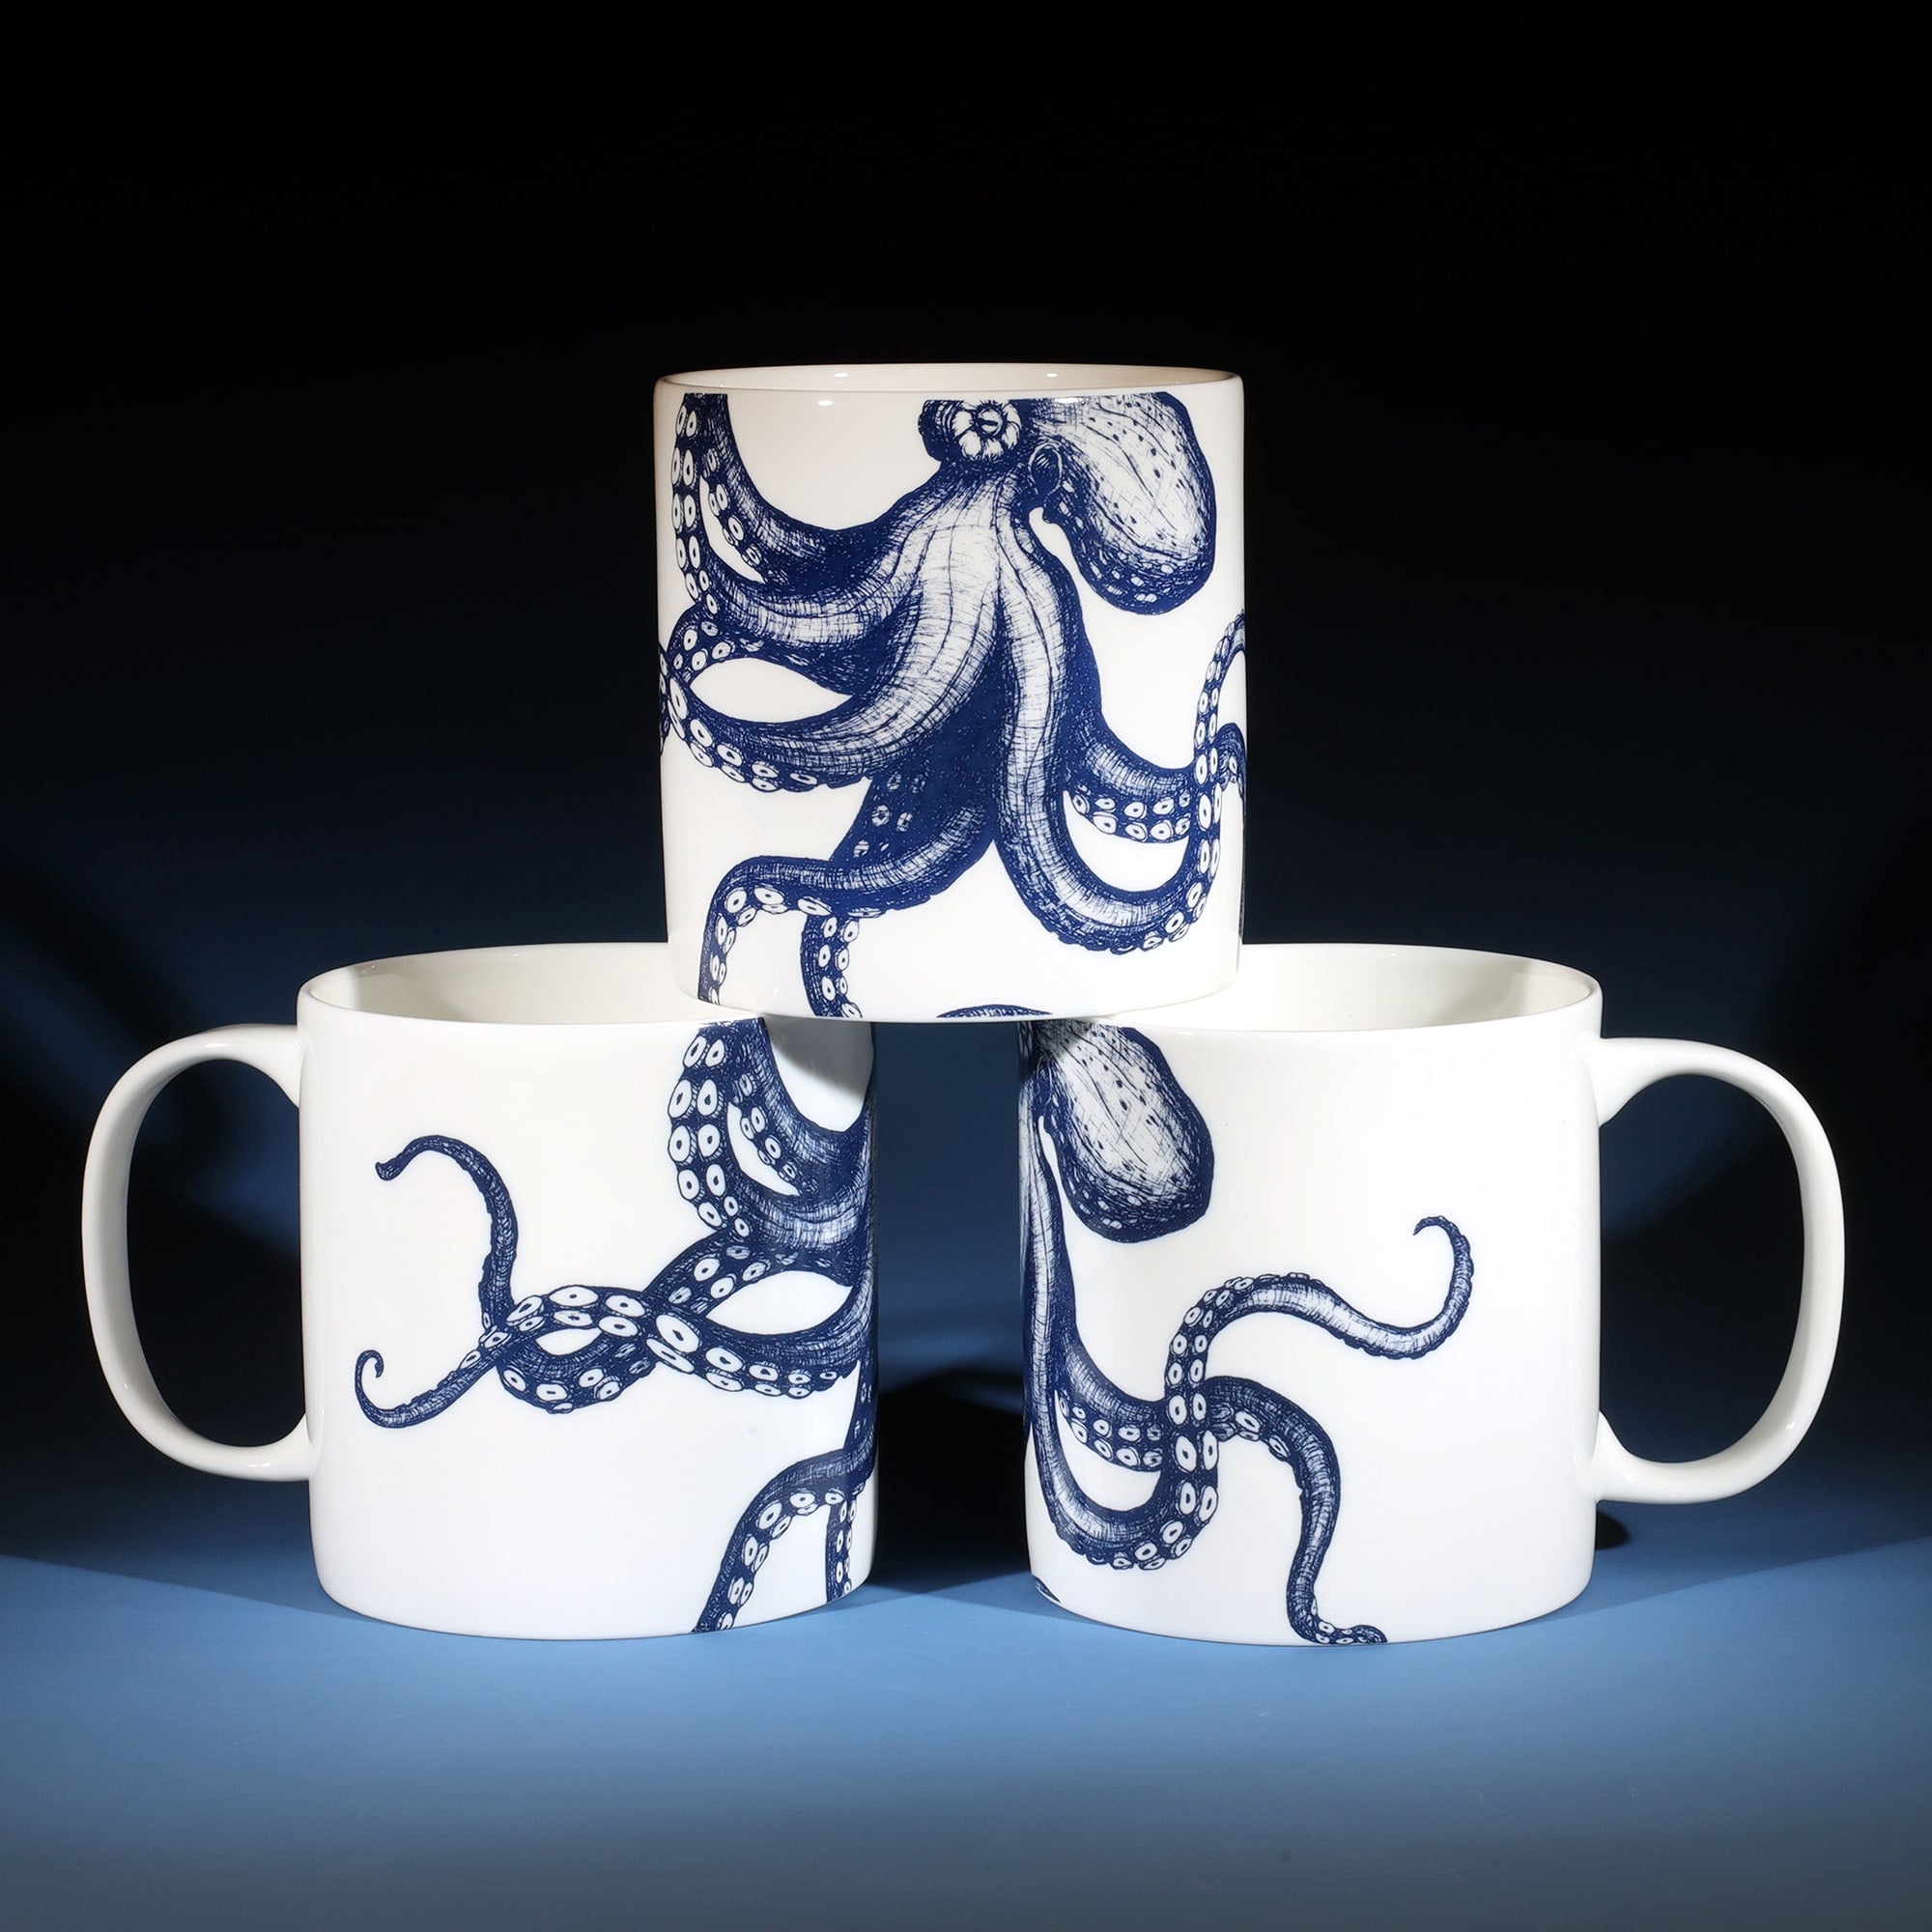 3 white bone china mugs with a navy blue octopus illustration on. The 2 at the bottom have the handles facing outwards and the one on the top is facing forward, so that you can see the mug from every angle.